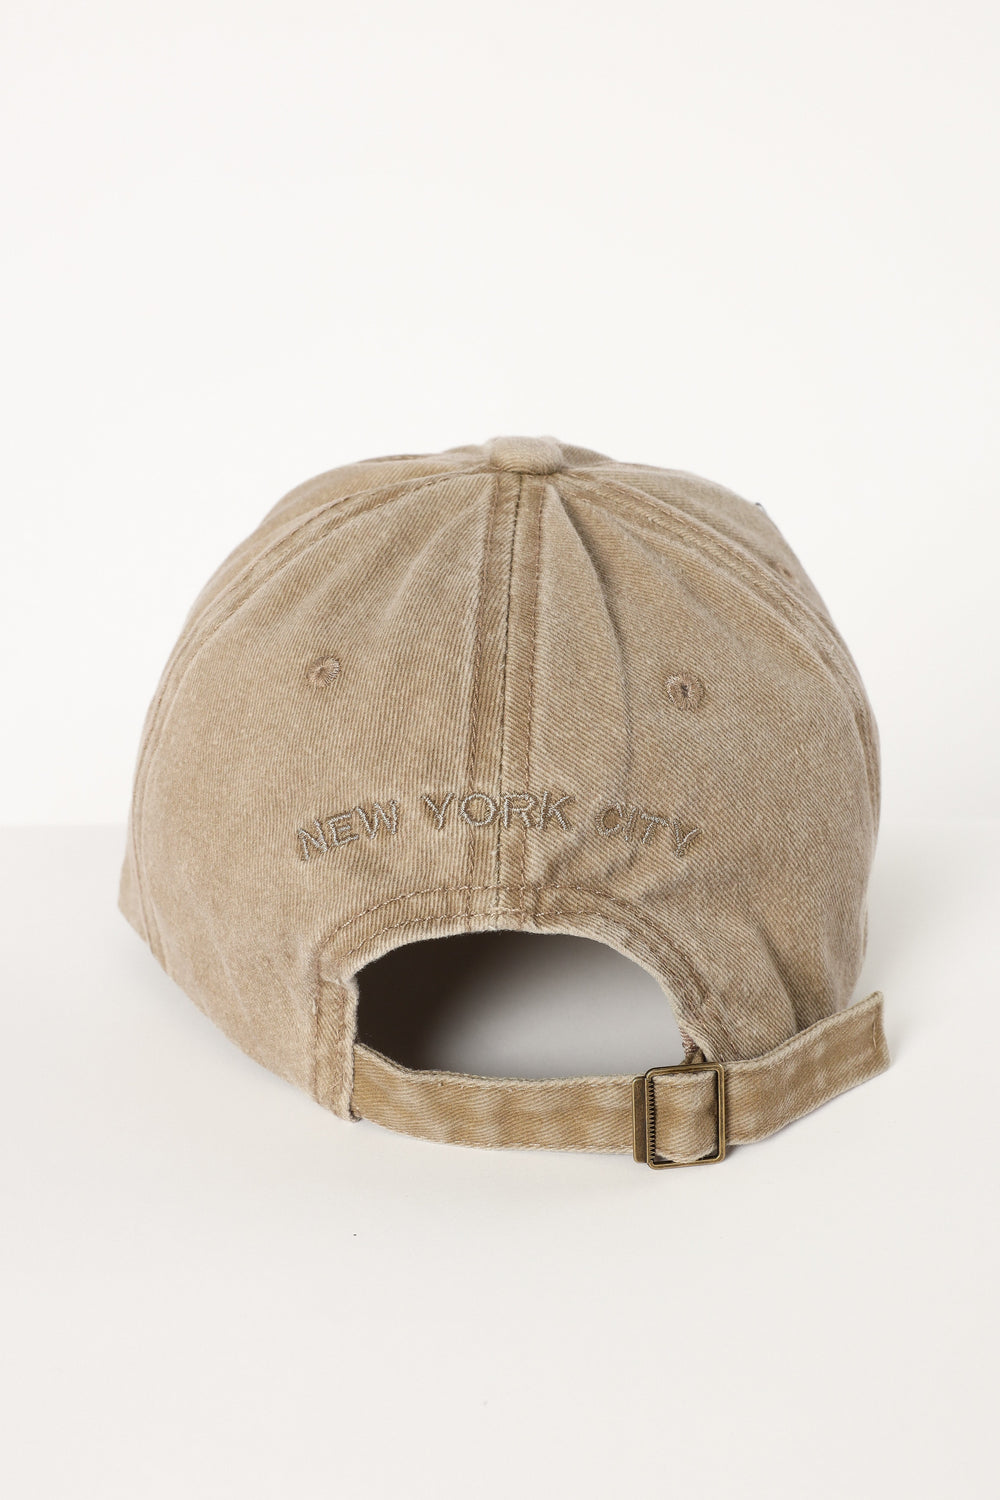 Petal and Pup USA ACCESSORIES Apollo Cap - Tan One Size